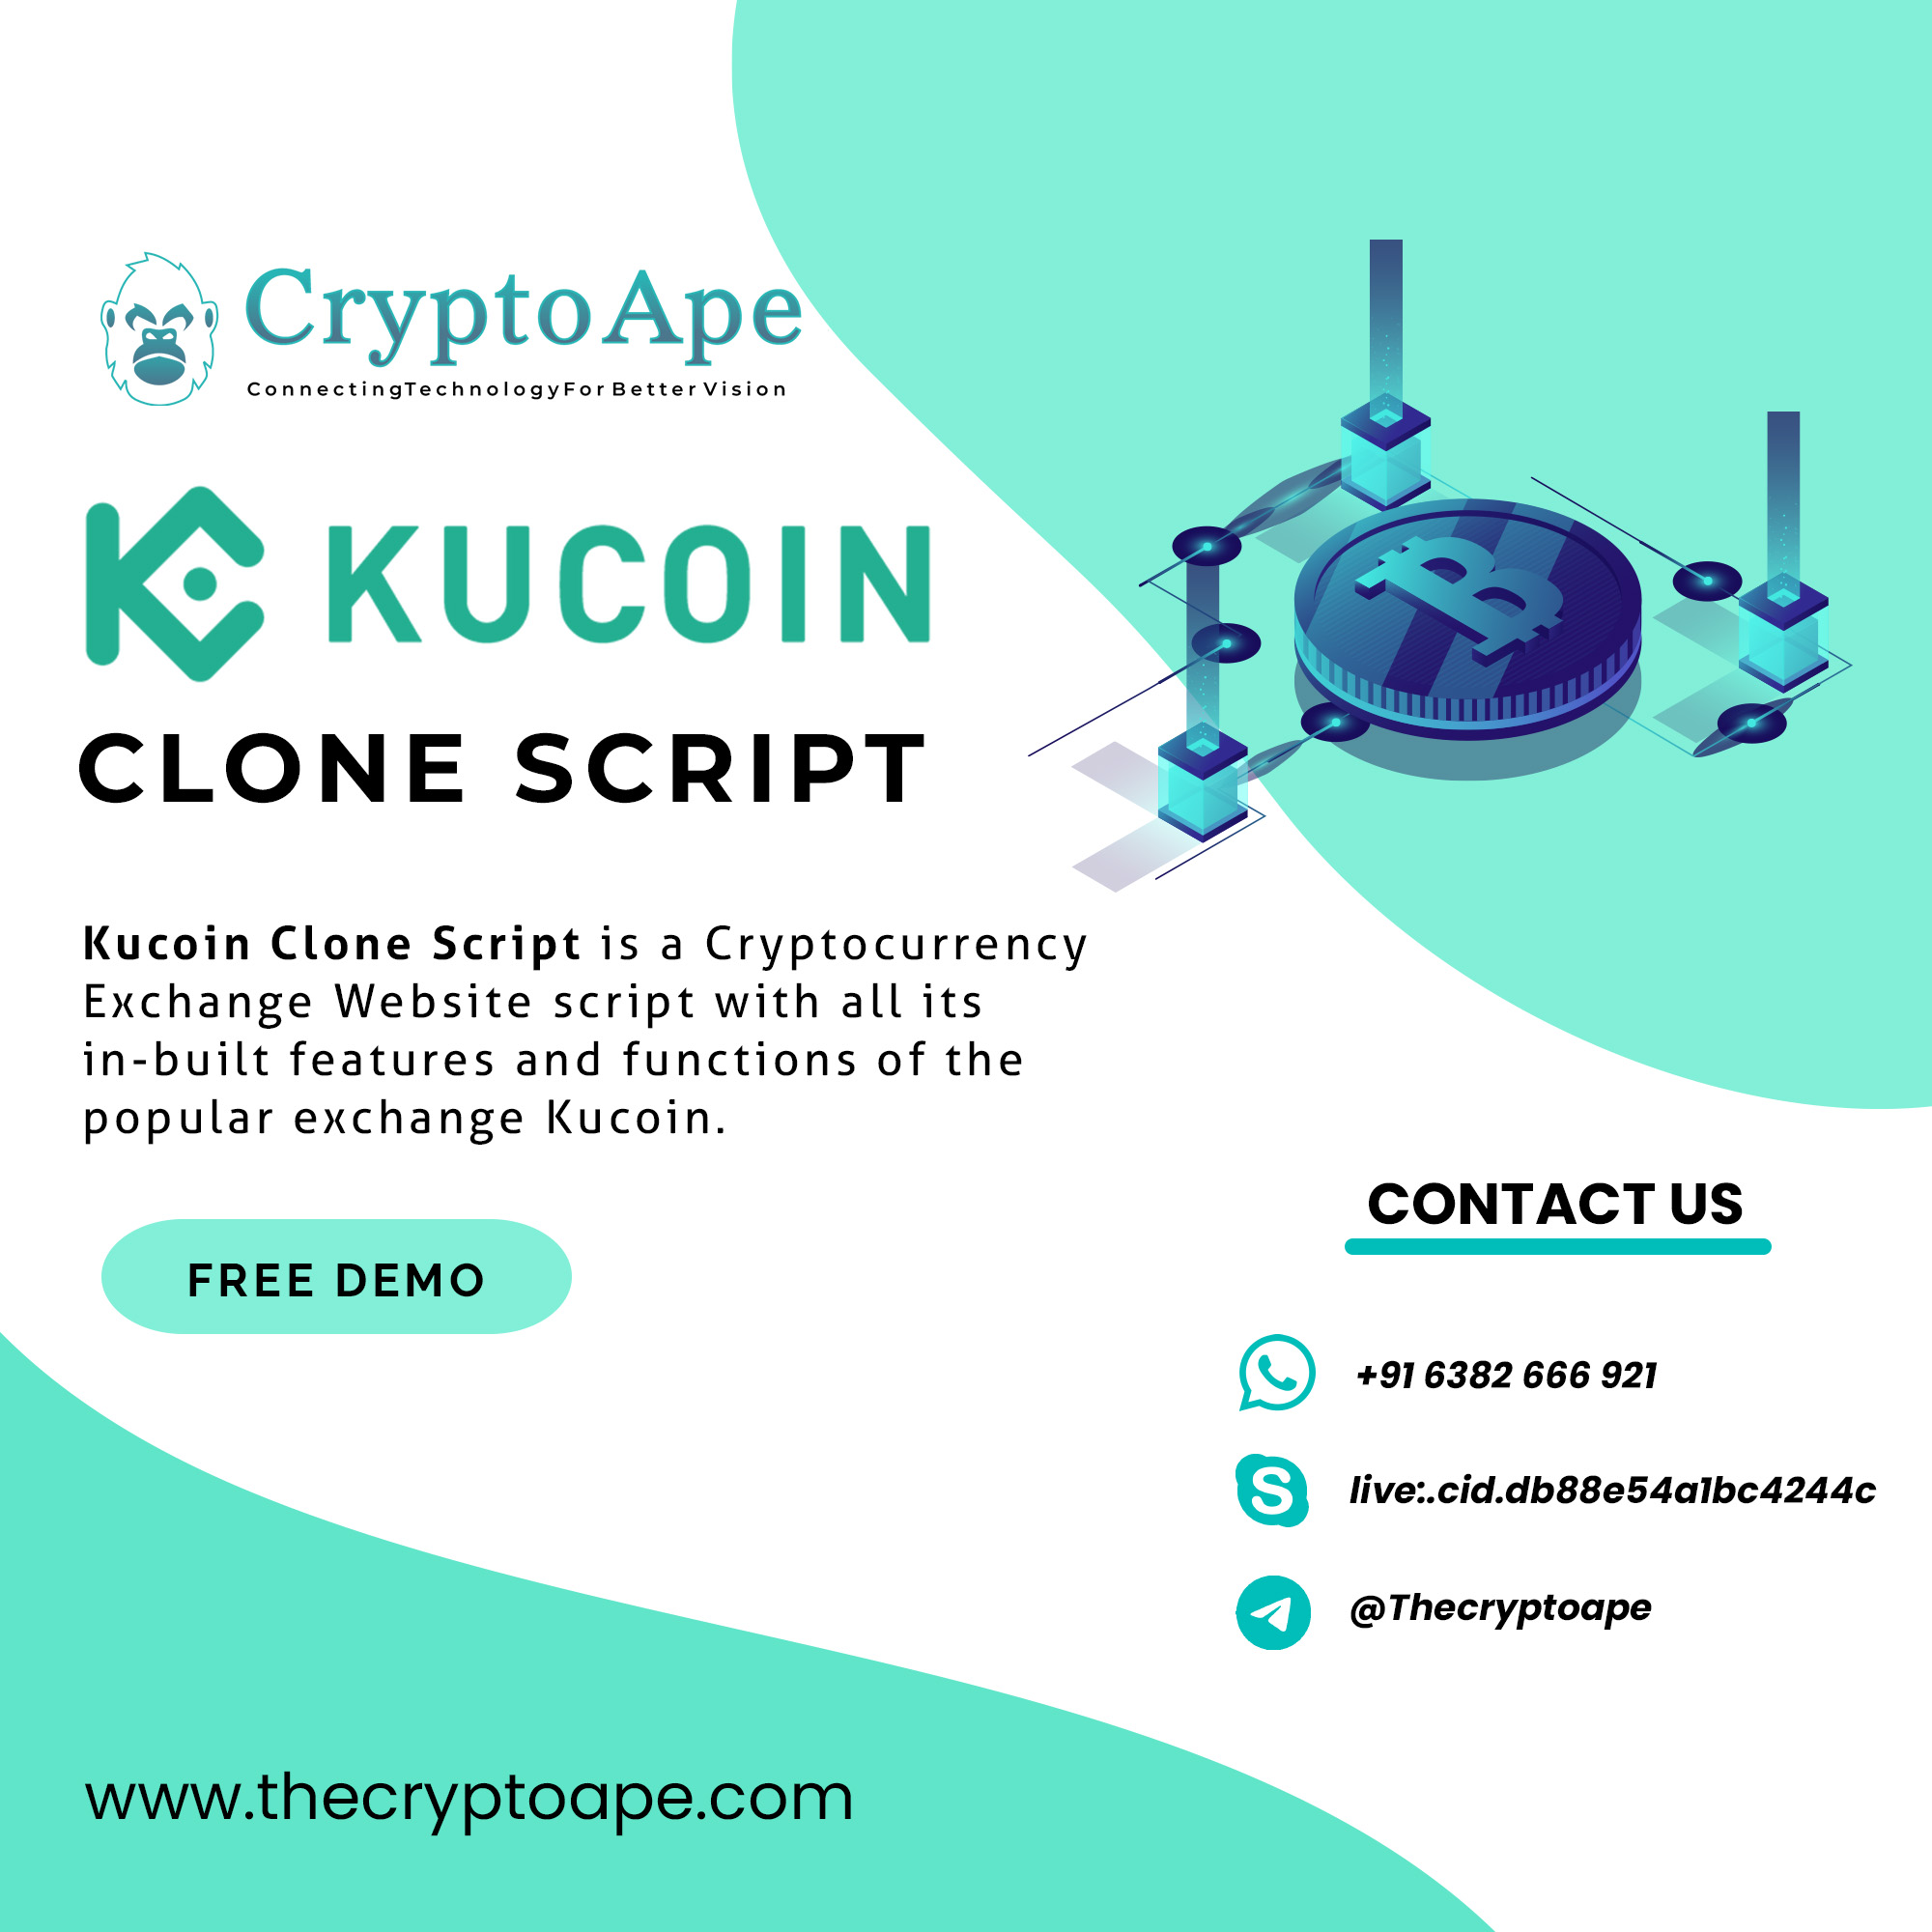 ®) CryptoApe

W ConnectingTechnologyForBetter Vision

- .
IK KUCOIN IE
CLONE SCRIPT ~~ & =

Kucoin Clone Script is a Cryptocurrency
Exchange Website script with all its
in-built features and functions of the
popular exchange Kucoin.

CONTACT US
FREE DEMO

© +91 6382 666 921

oS live:.cid.db88e54albc4244c

oO @Thecryptoape

www.thecryptoape.com